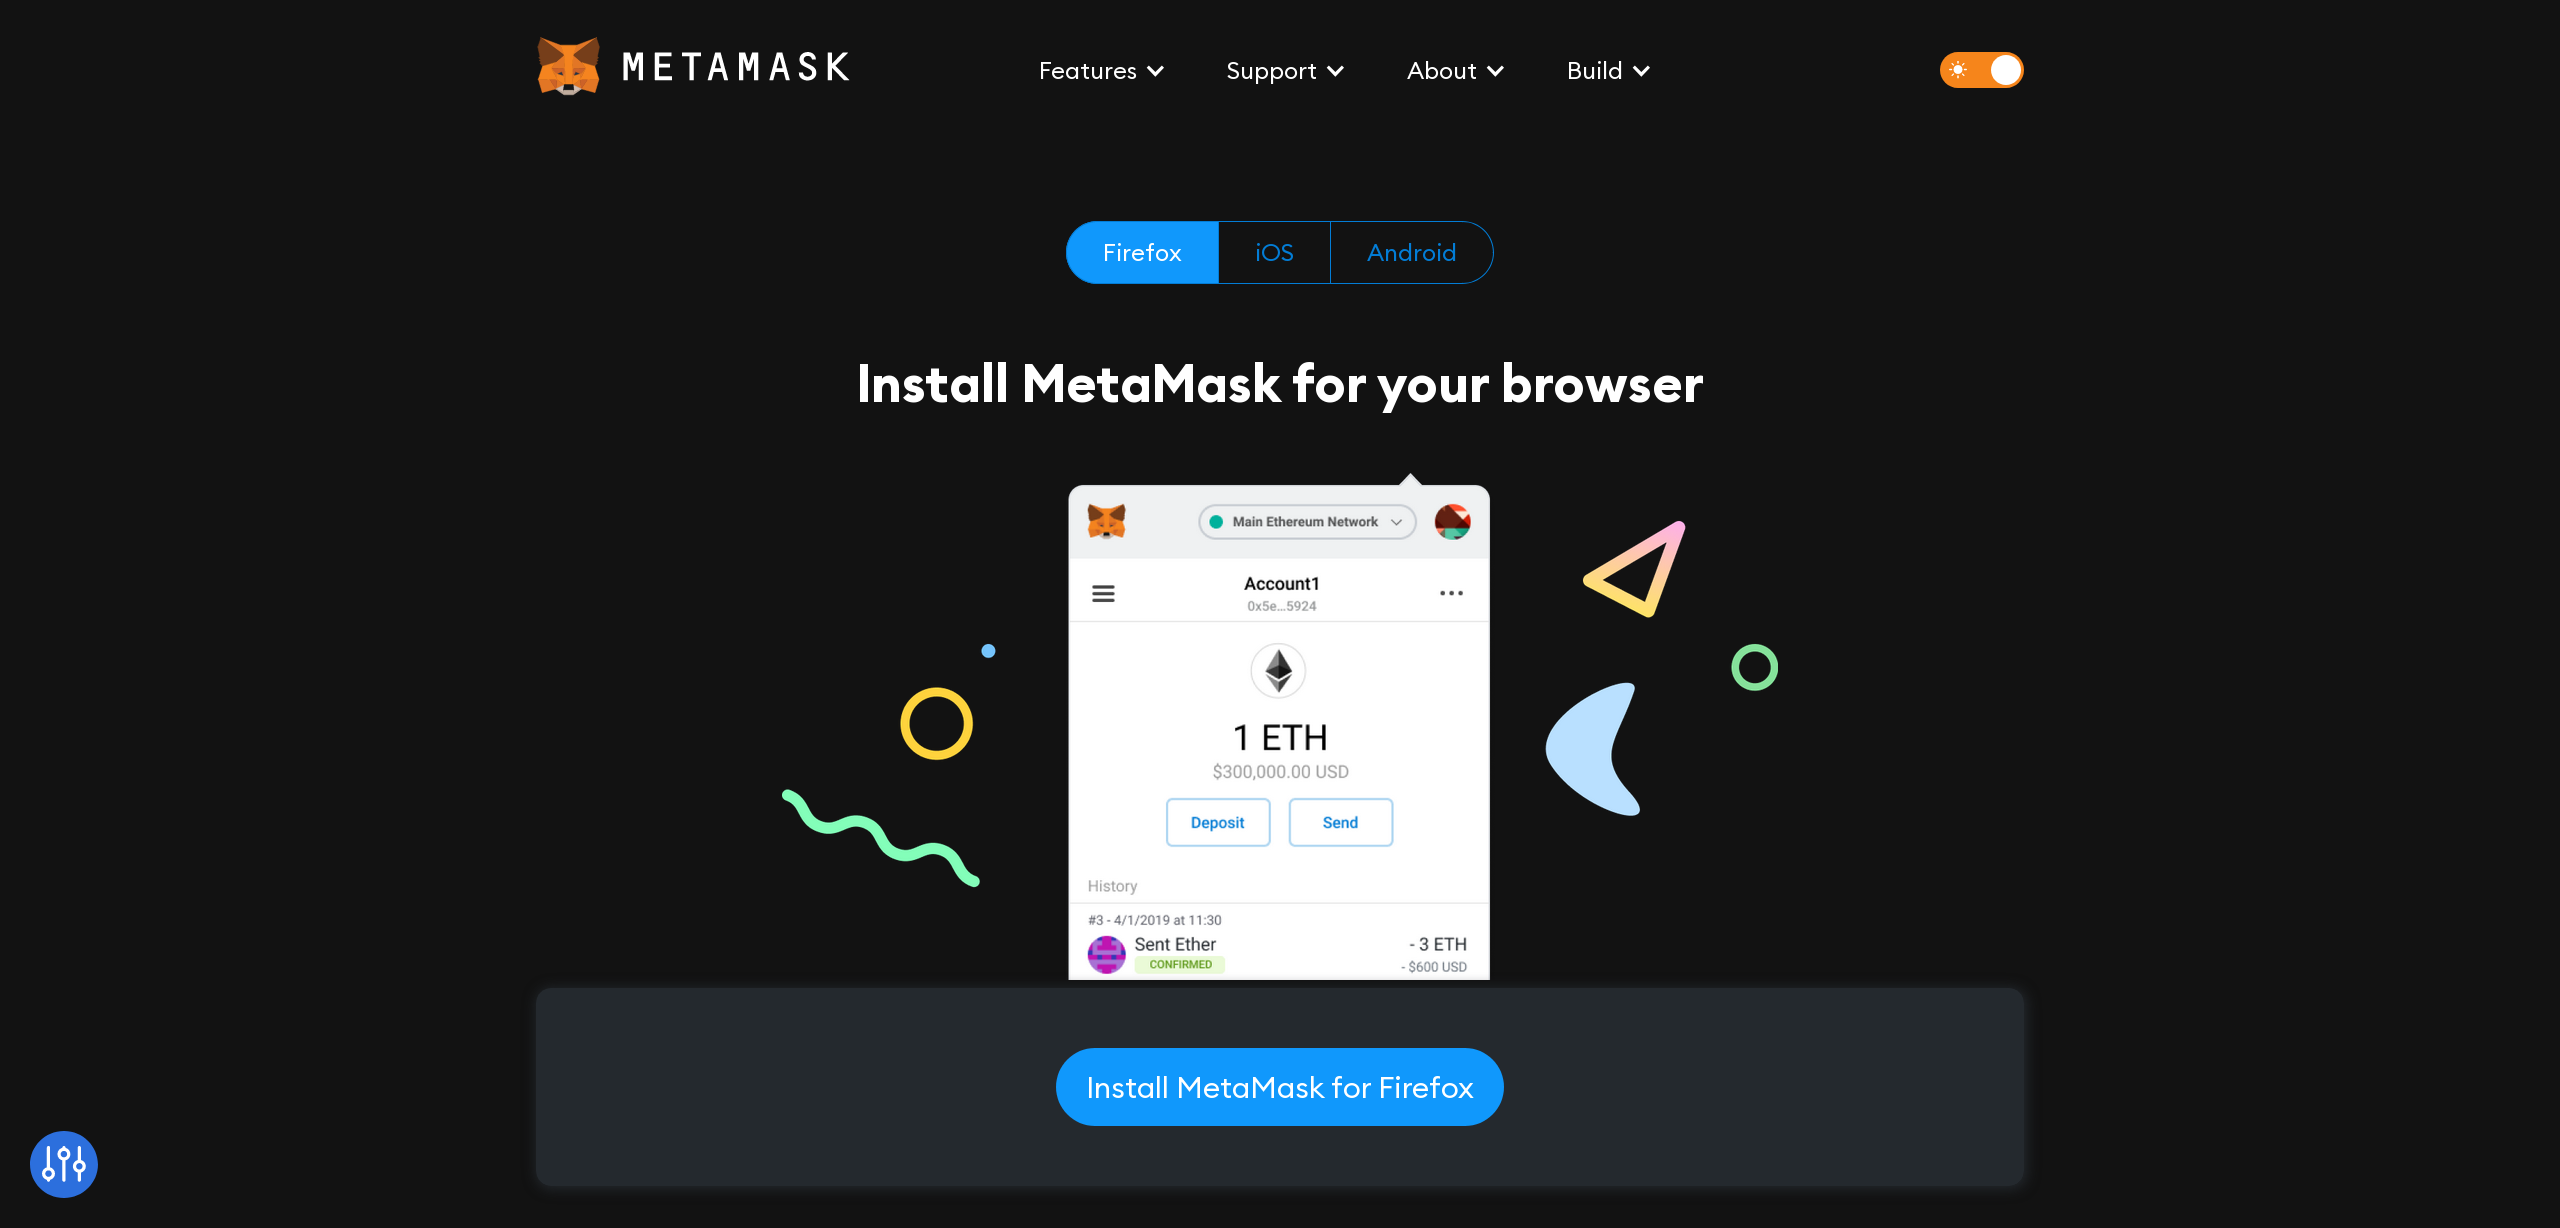 Install Metamask on your browser, click the button to continue